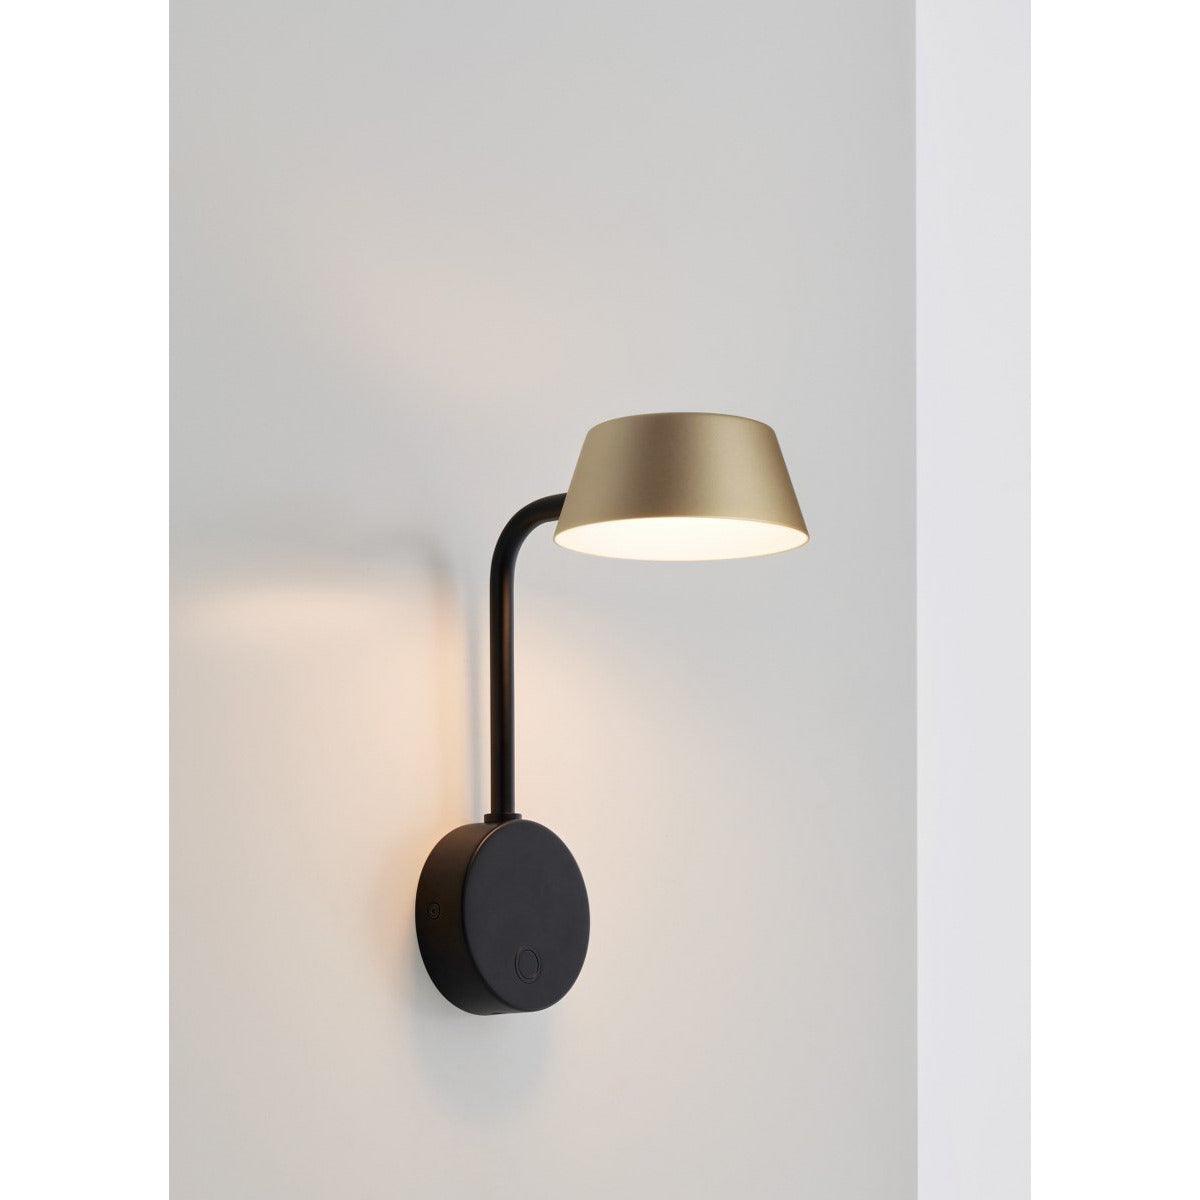 Seed Design - OLO Arm Wall Lamp - SLD-130WUTE-GLD | Montreal Lighting & Hardware